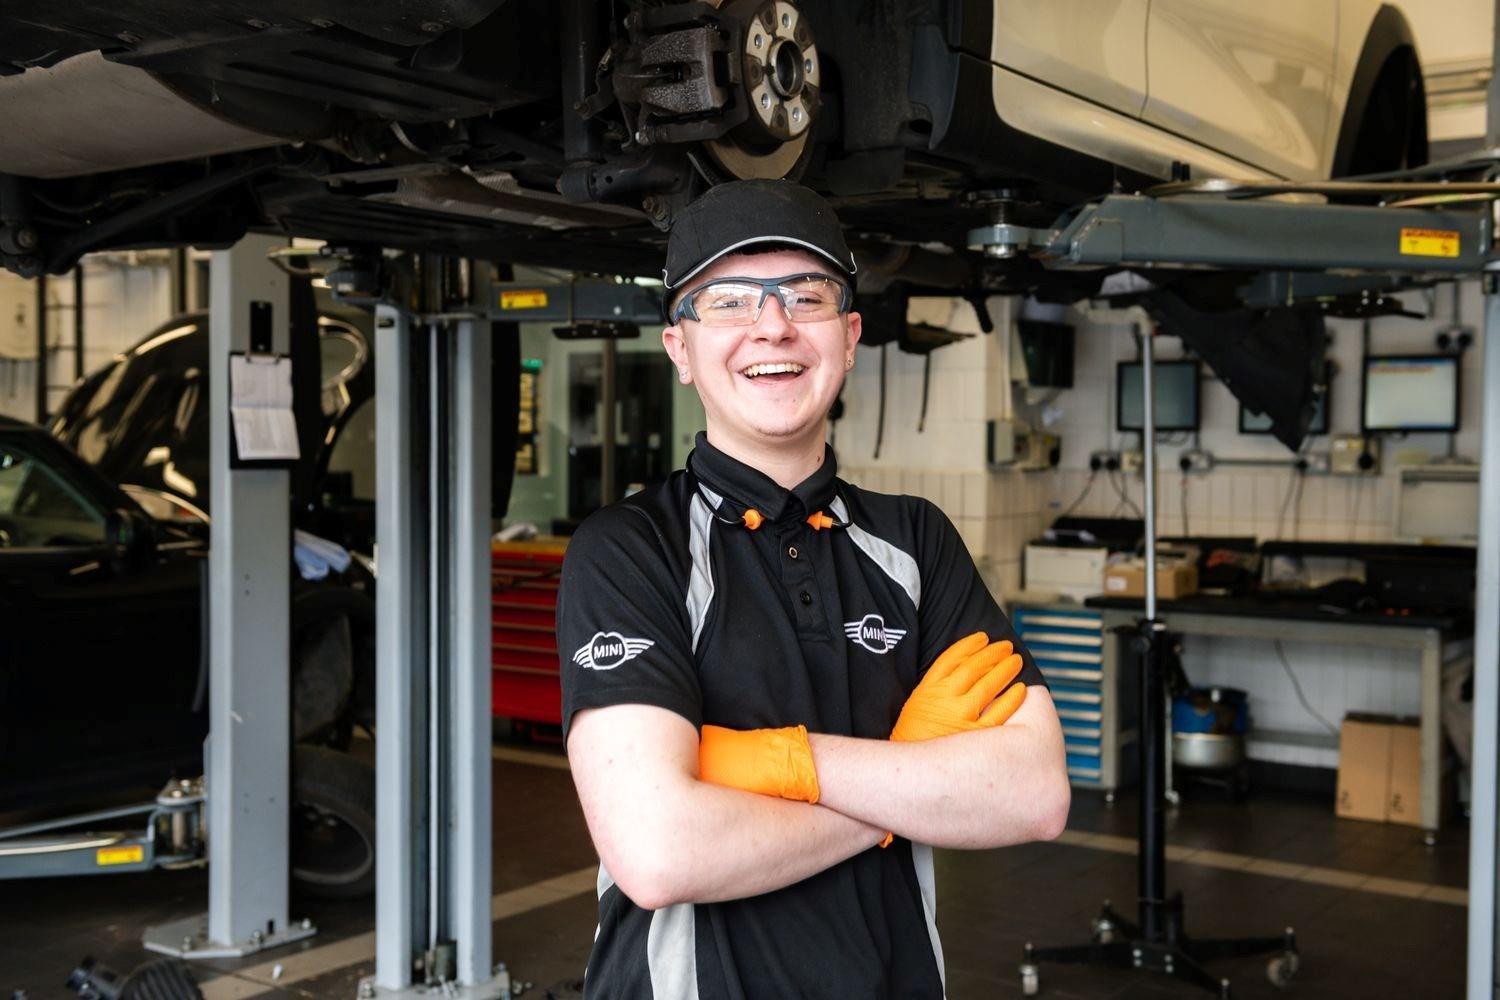 Smiling MINI Repair Specialist poses with crossed arms at the Bavarian MINI Repair Centre with MINI vehicle lifted in the background